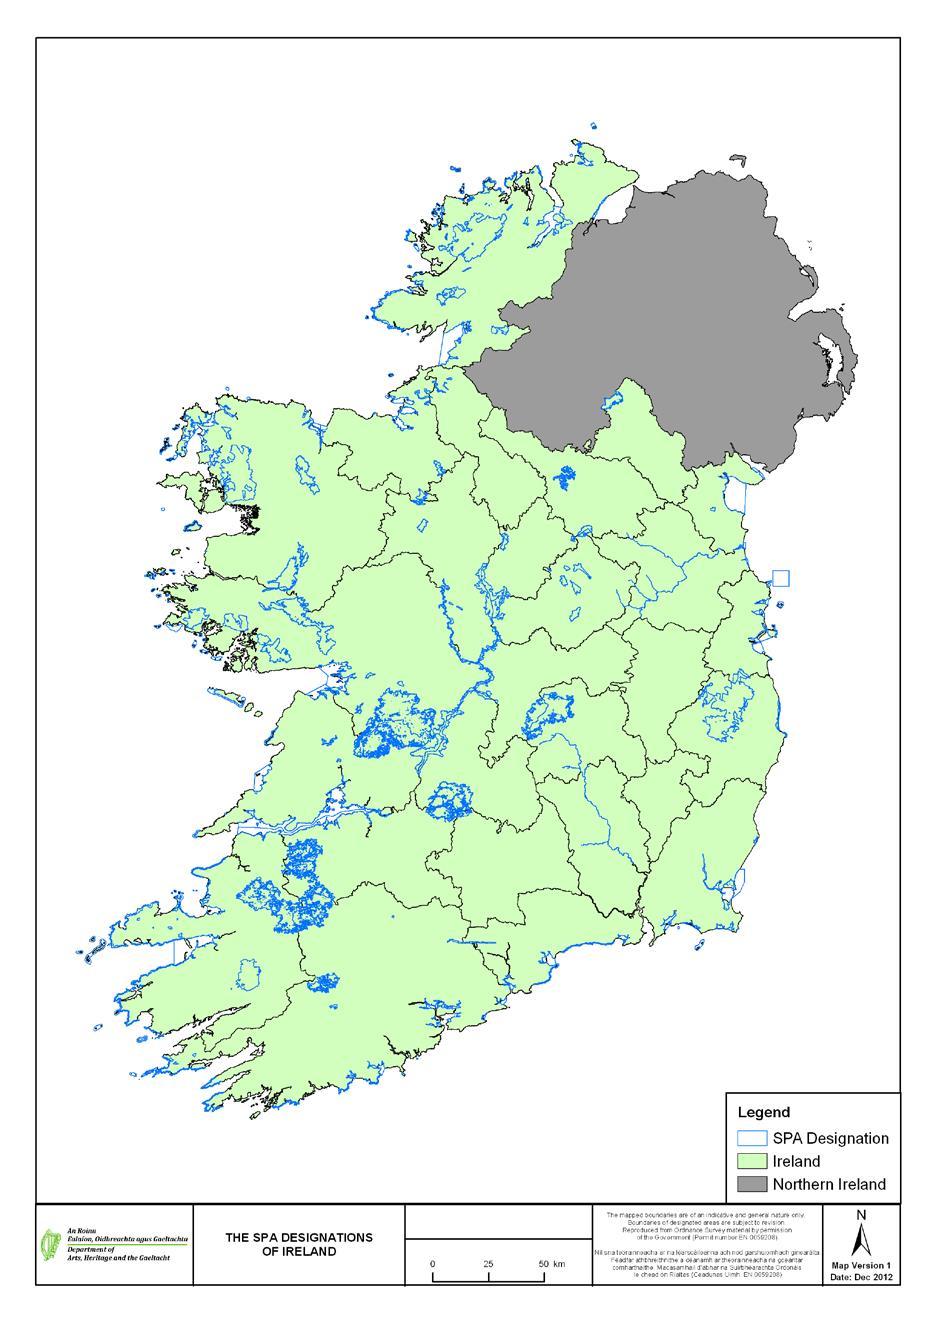 SPAs in Ireland 154 SPAs protected under Birds Directive Ireland is of particular importance for migratory waterbirds and breeding seabirds.